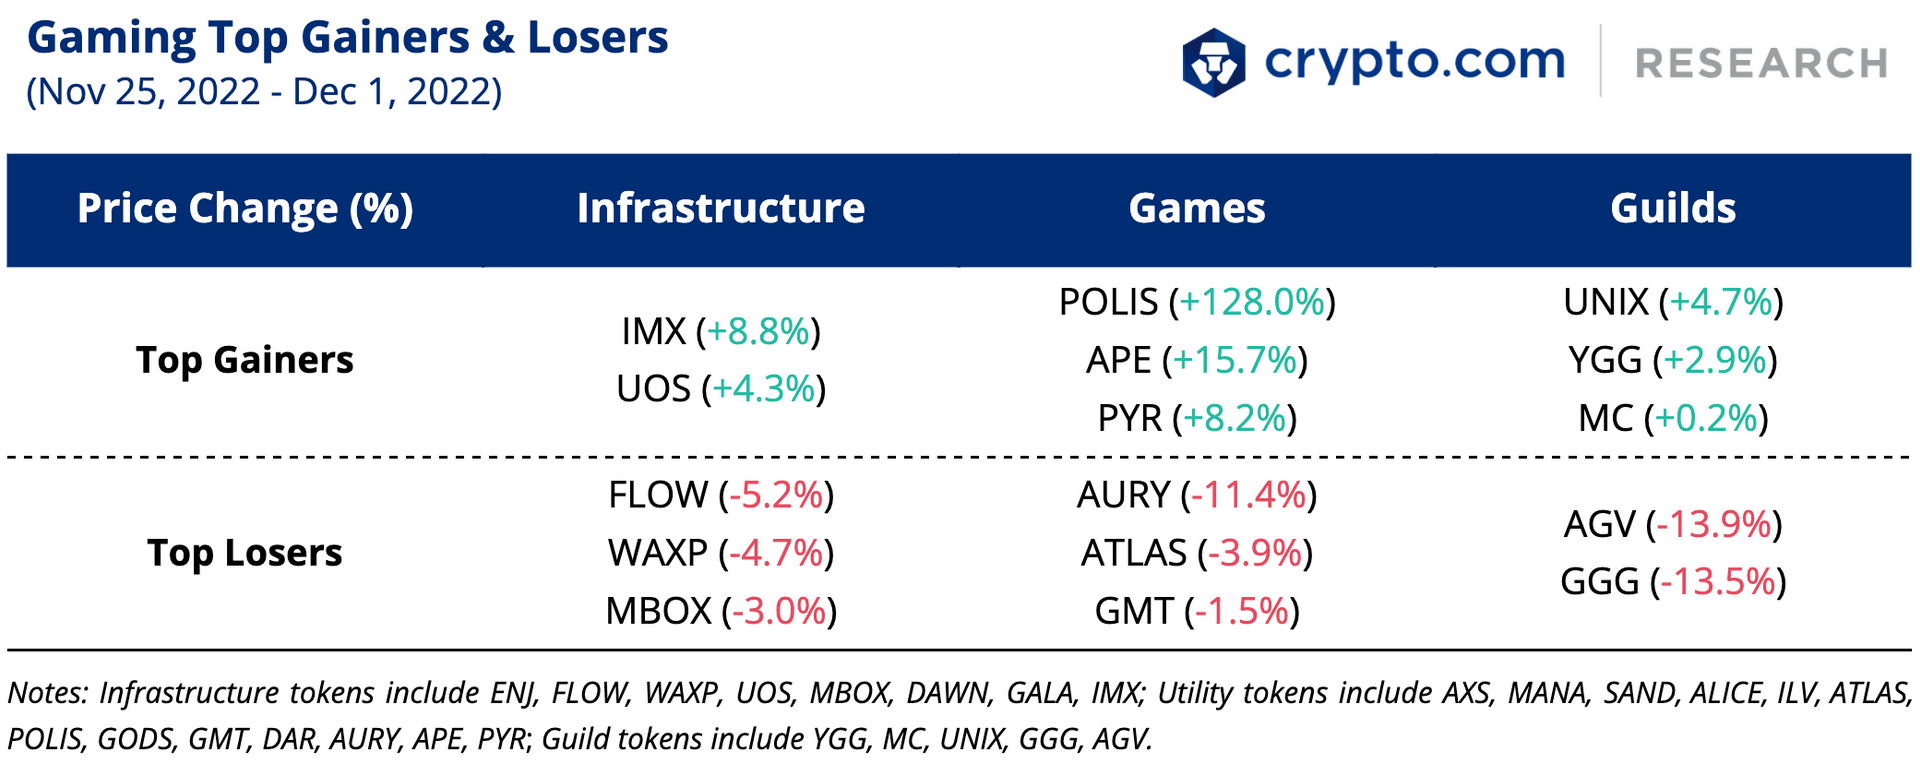 Blockchain Gaming Top Gainers and Losers